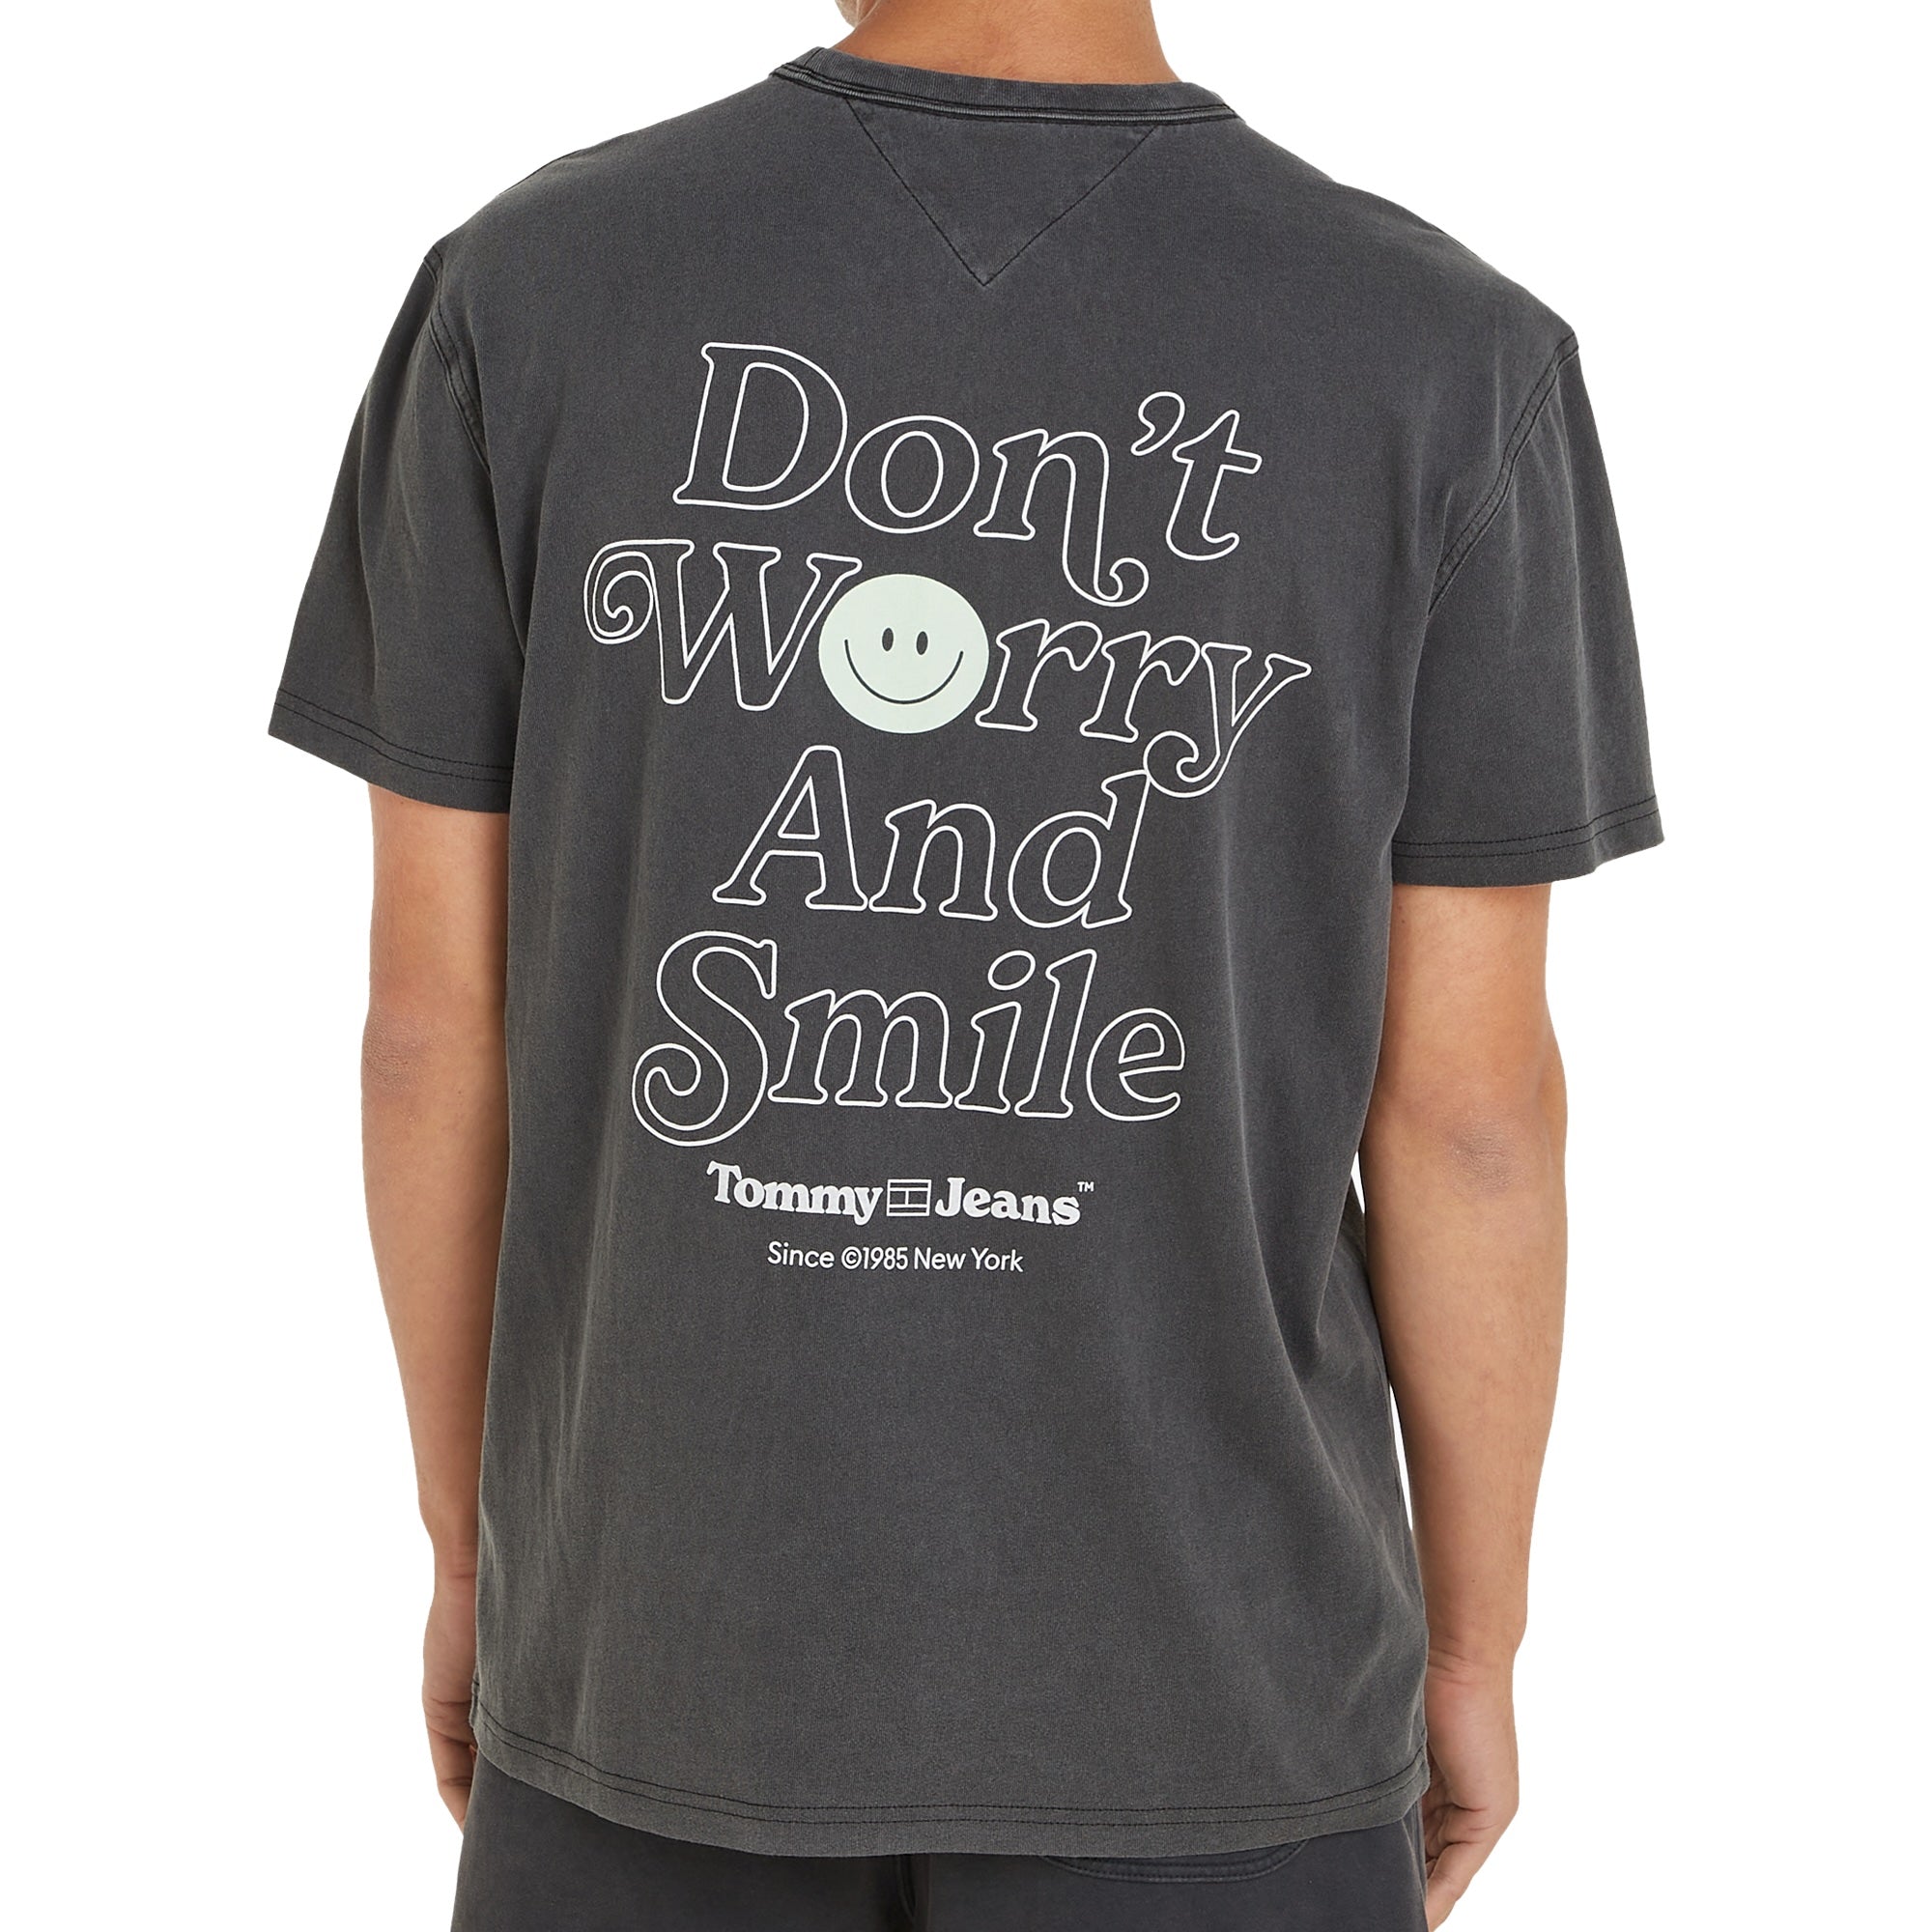 Tommy Jeans Don't Worry And Smile Graphic T-Shirt - Washed Black